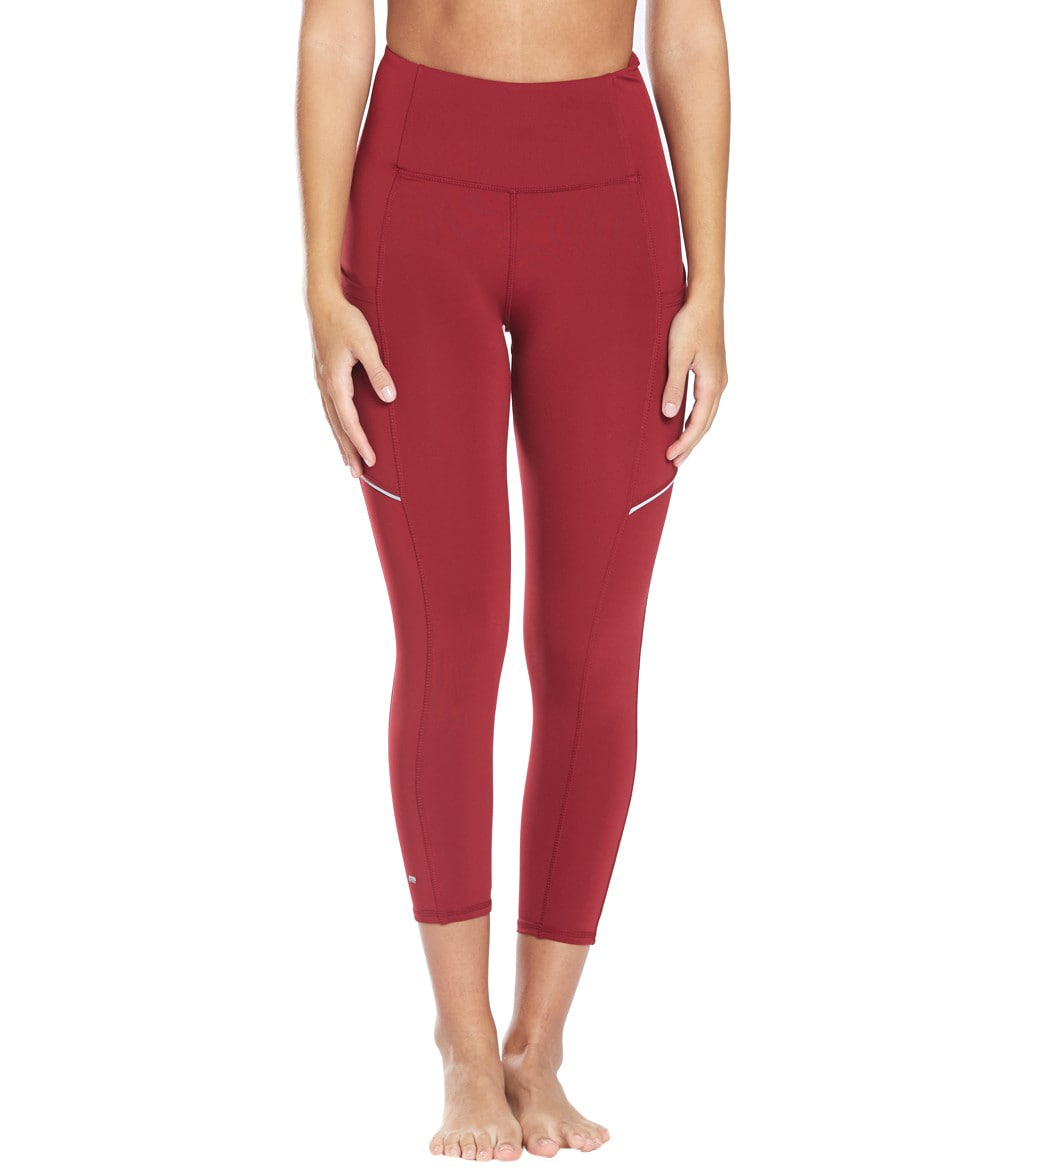 Balance Collection Align High Waisted Yoga Leggings at YogaOutlet